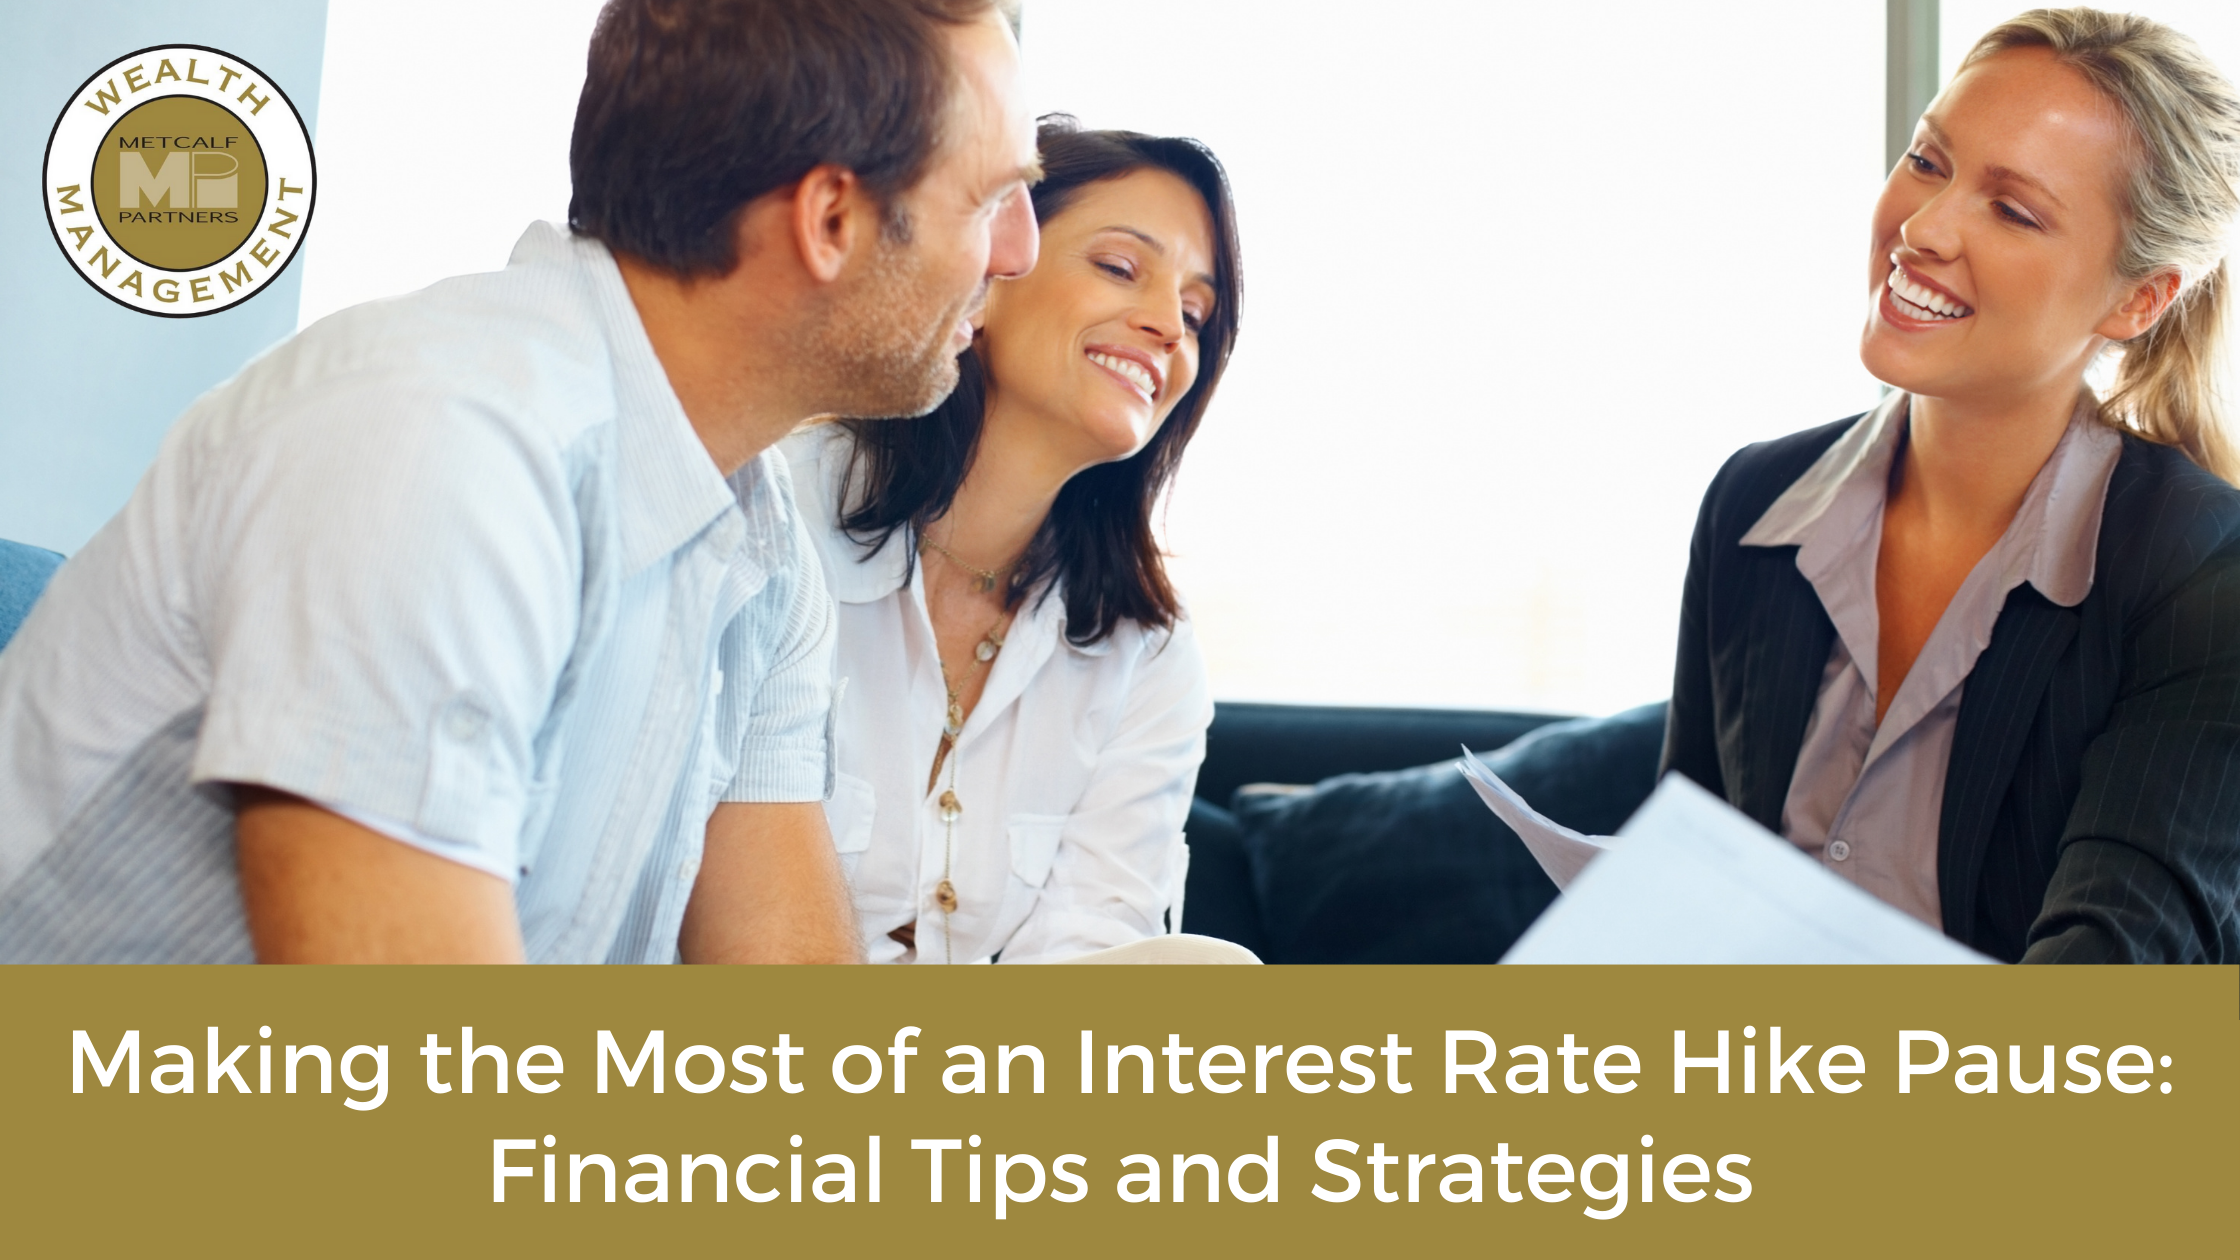 Featured image for “Making the Most of an Interest Rate Hike Pause: Financial Tips and Strategies”